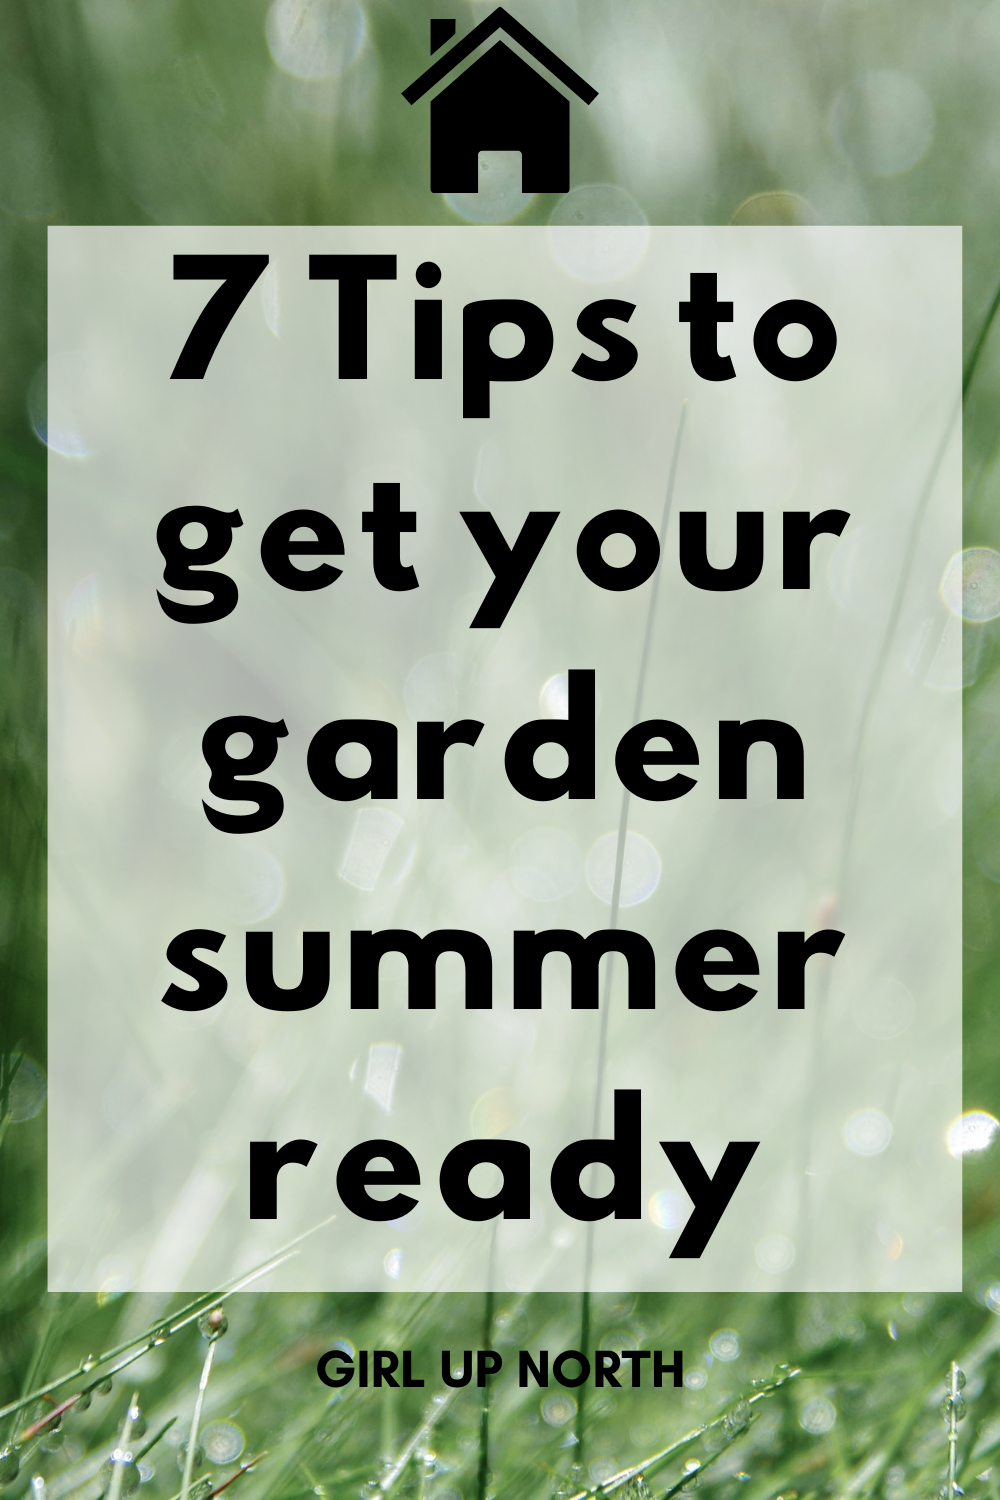 Getting Your Garden Ready For Spring And Summer It's Not as ...